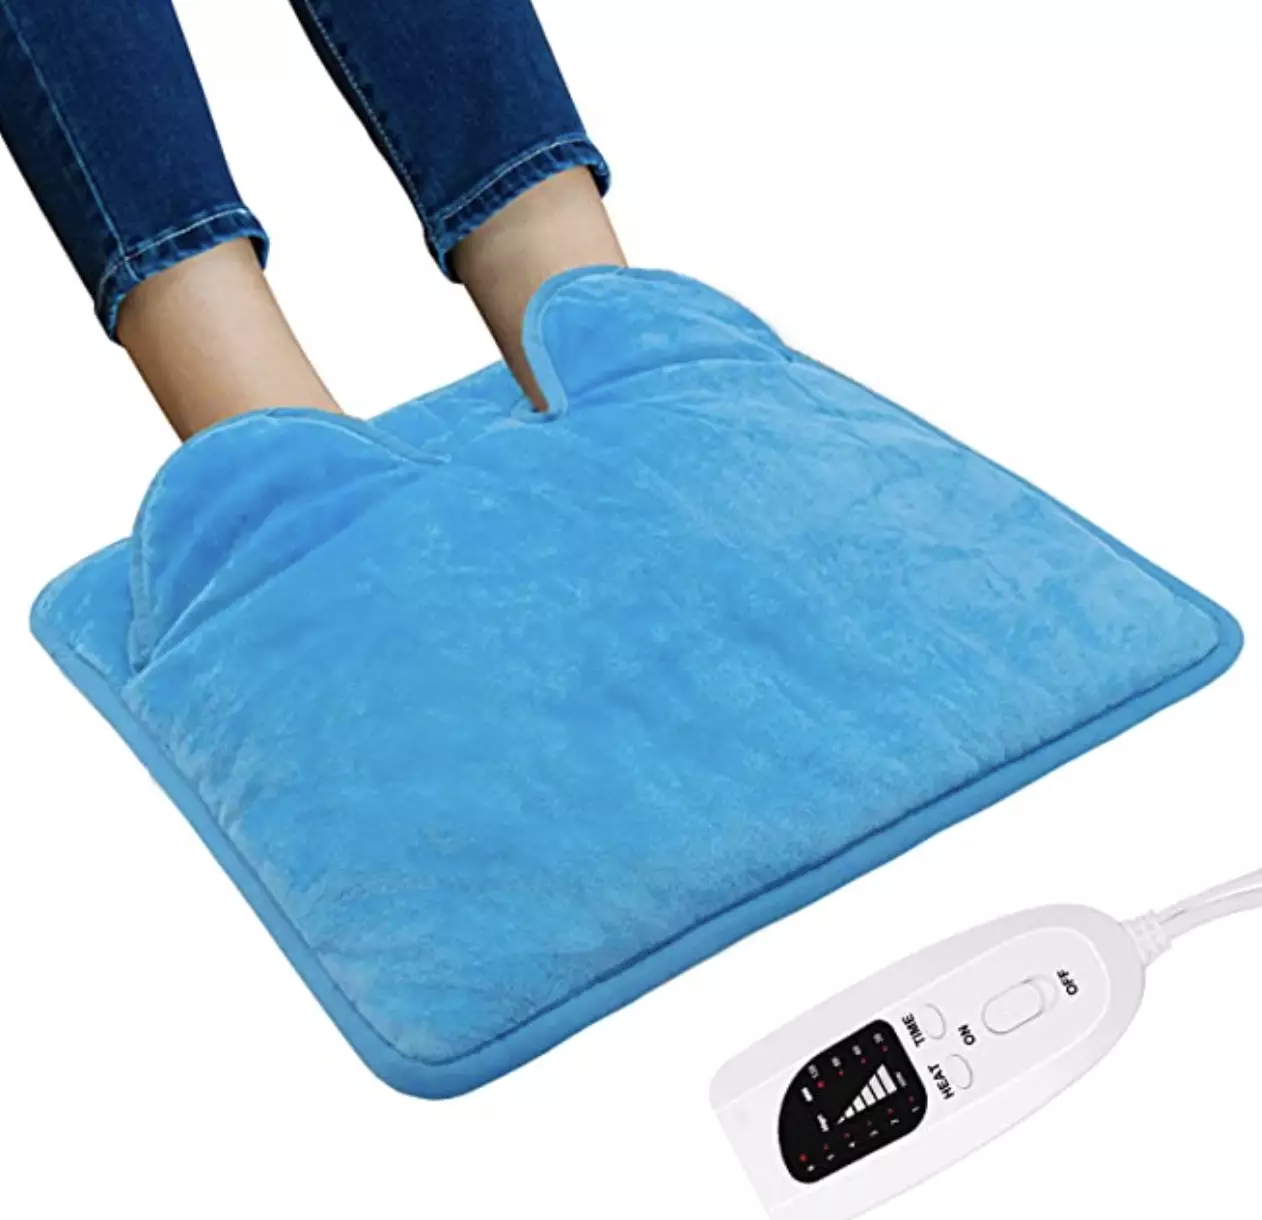 You can buy a foot warmer over on Amazon (